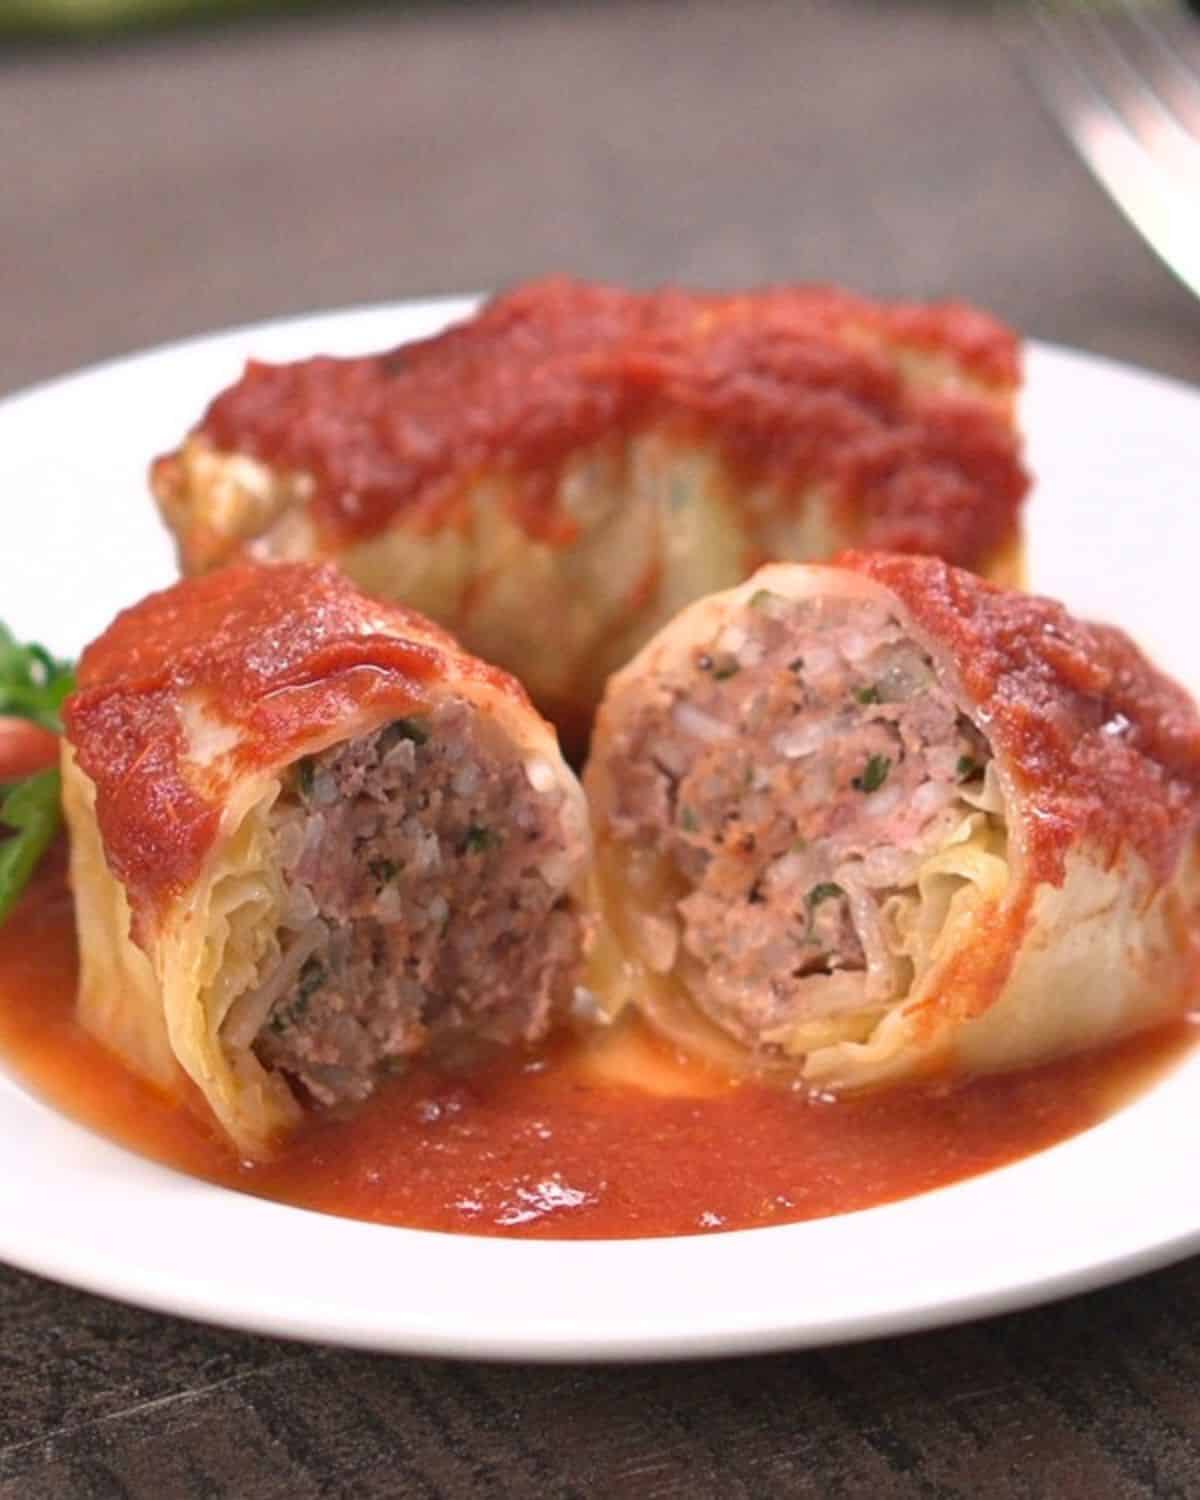 Two cabbage rolls on white place in sauce. Front cabbage roll is cut in half.